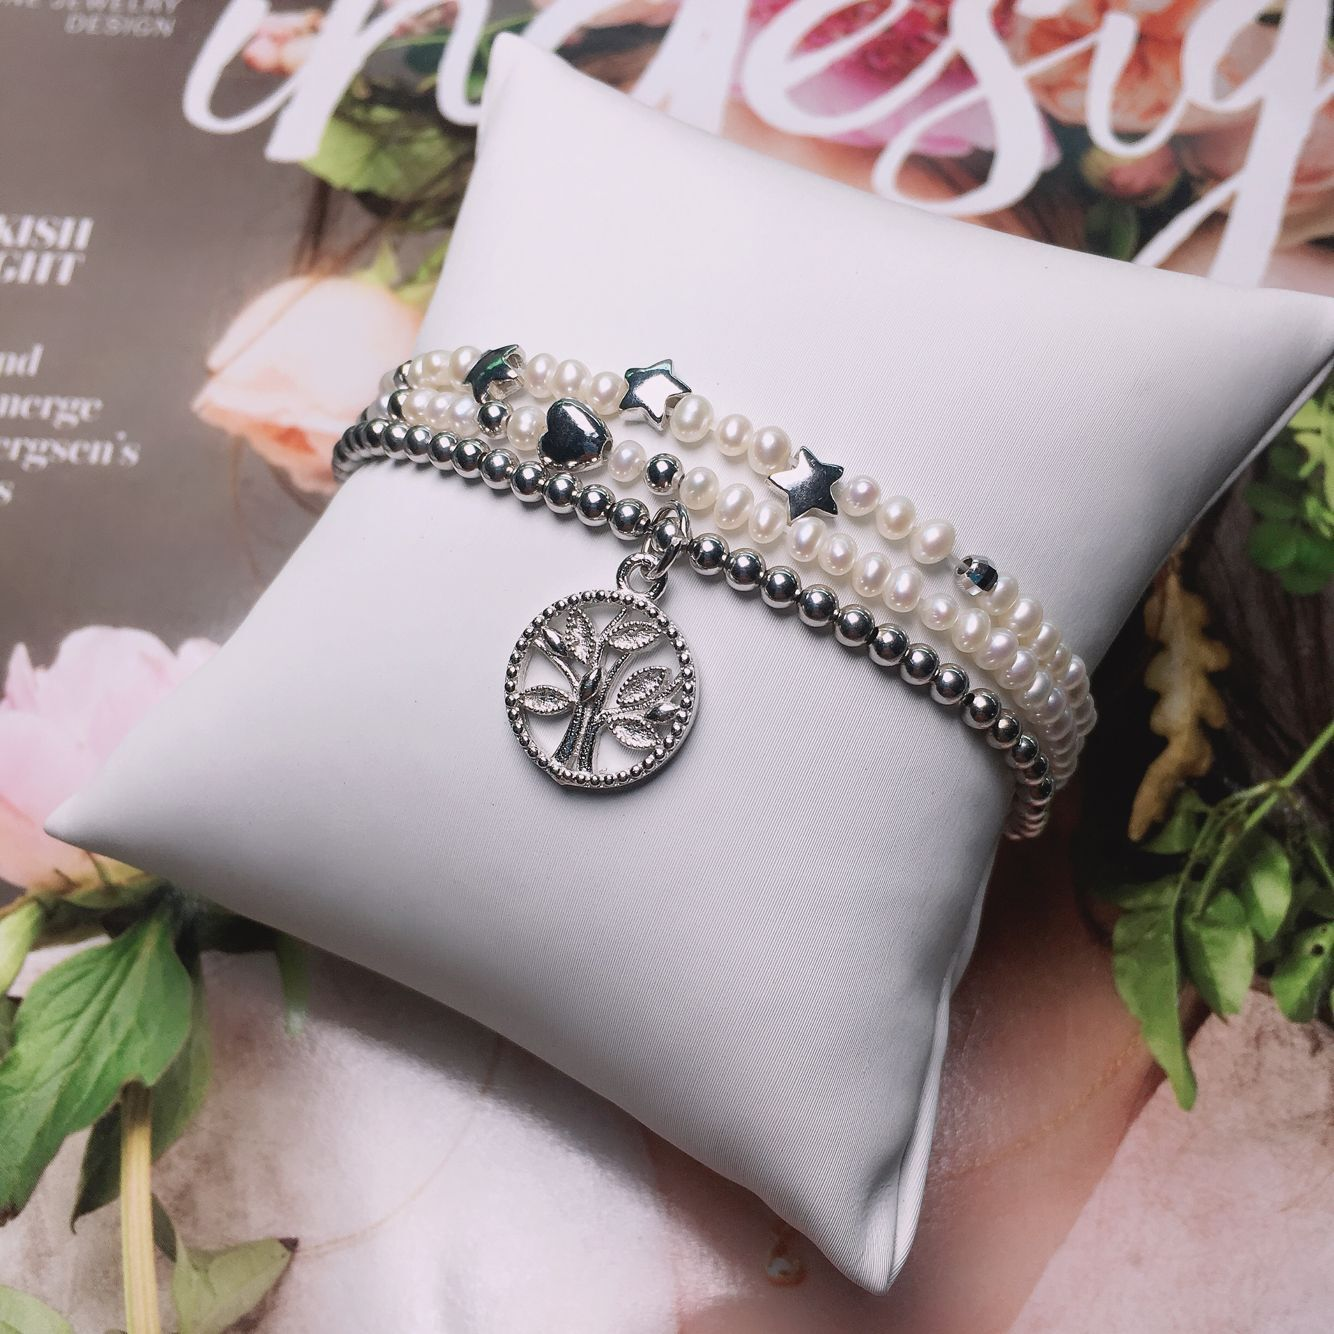 NEW gift friend very good quality fresh water pearl and silver beads bracelet with 925 silver charms bracelet for girl